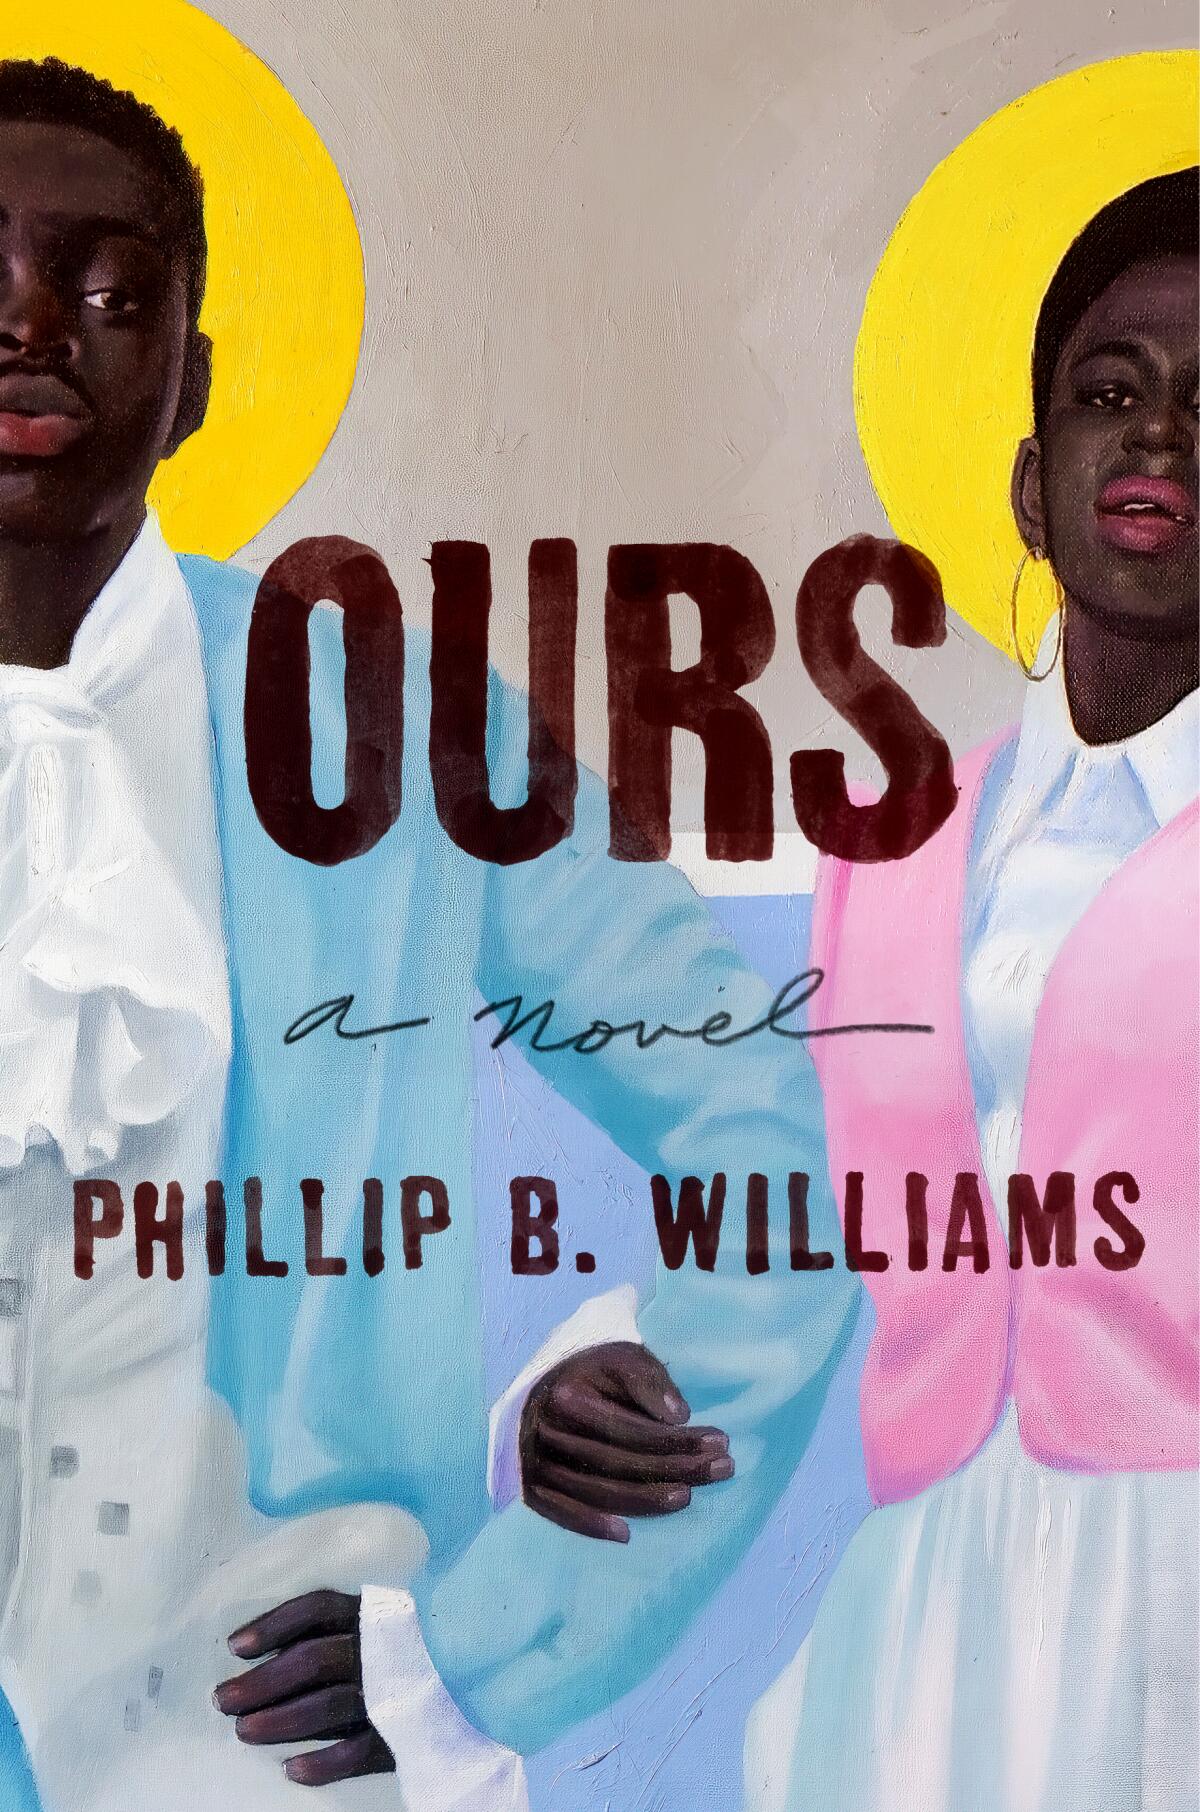 'Ours' by Phillip B. Williams